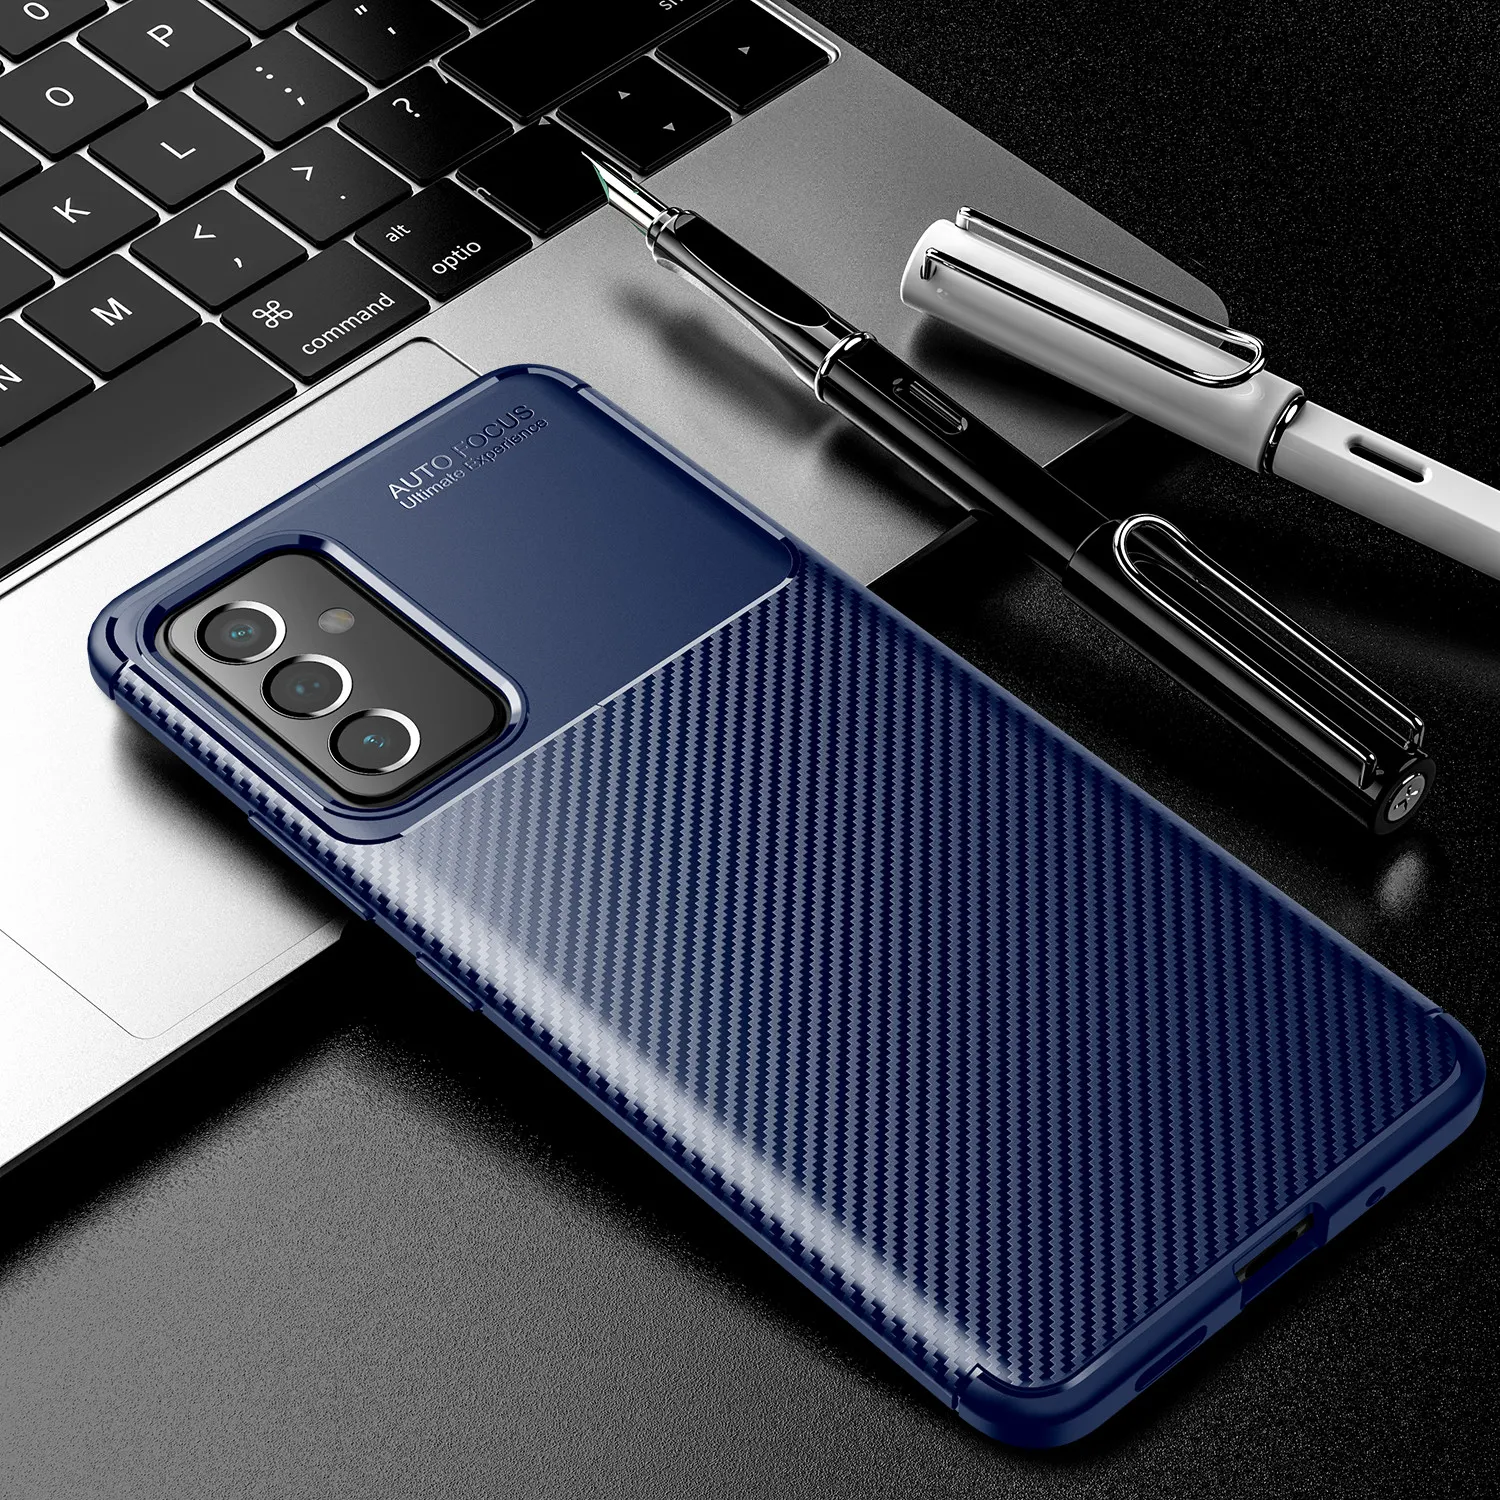 Luxury Carbon Fiber Shockproof Cases For Samsung Galaxy A82 5G Soft TPU Silicone Bumper Protective Back Cover Capa Coque Fundas